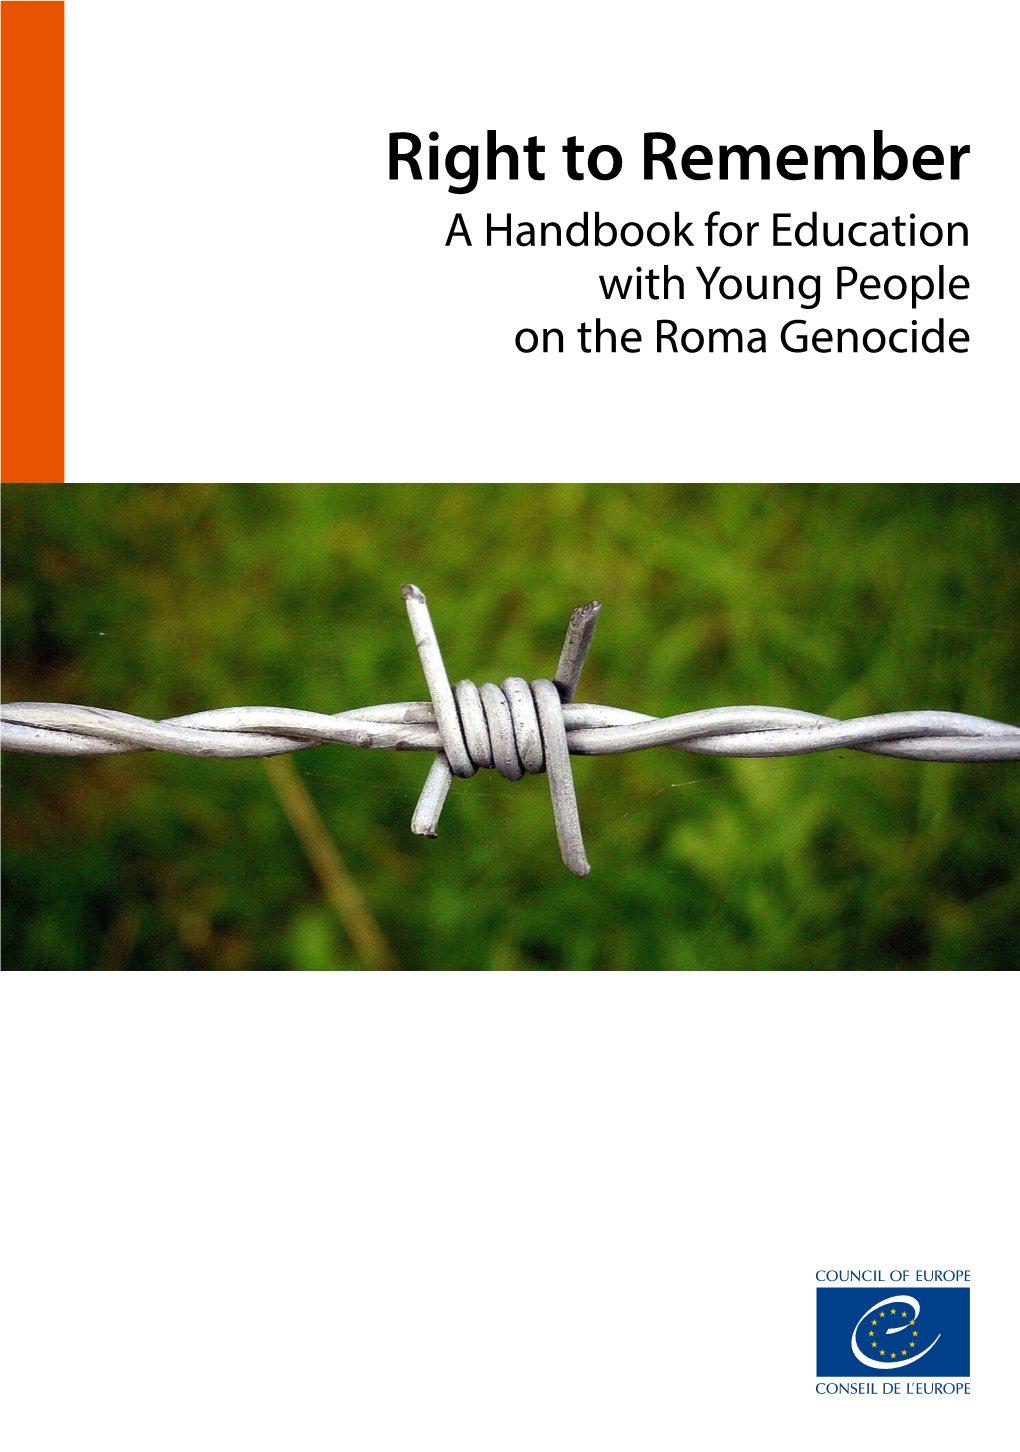 A Handbook for Education with Young People on the Roma Genocide